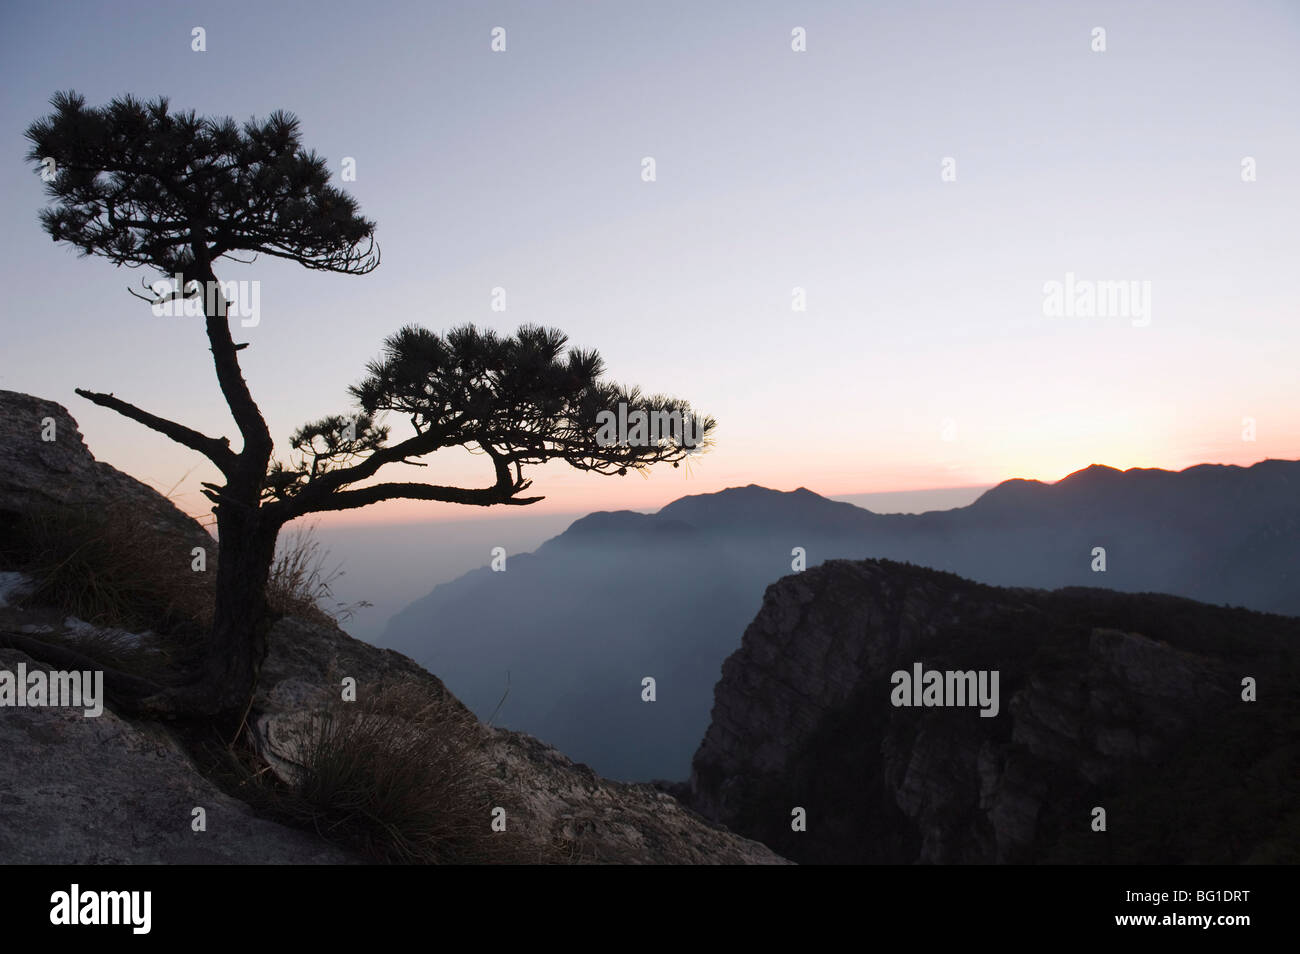 Pine tree silhouetted at dusk on Lushan mountain, UNESCO World Heritage Site, Jiangxi Province, China, Asia Stock Photo